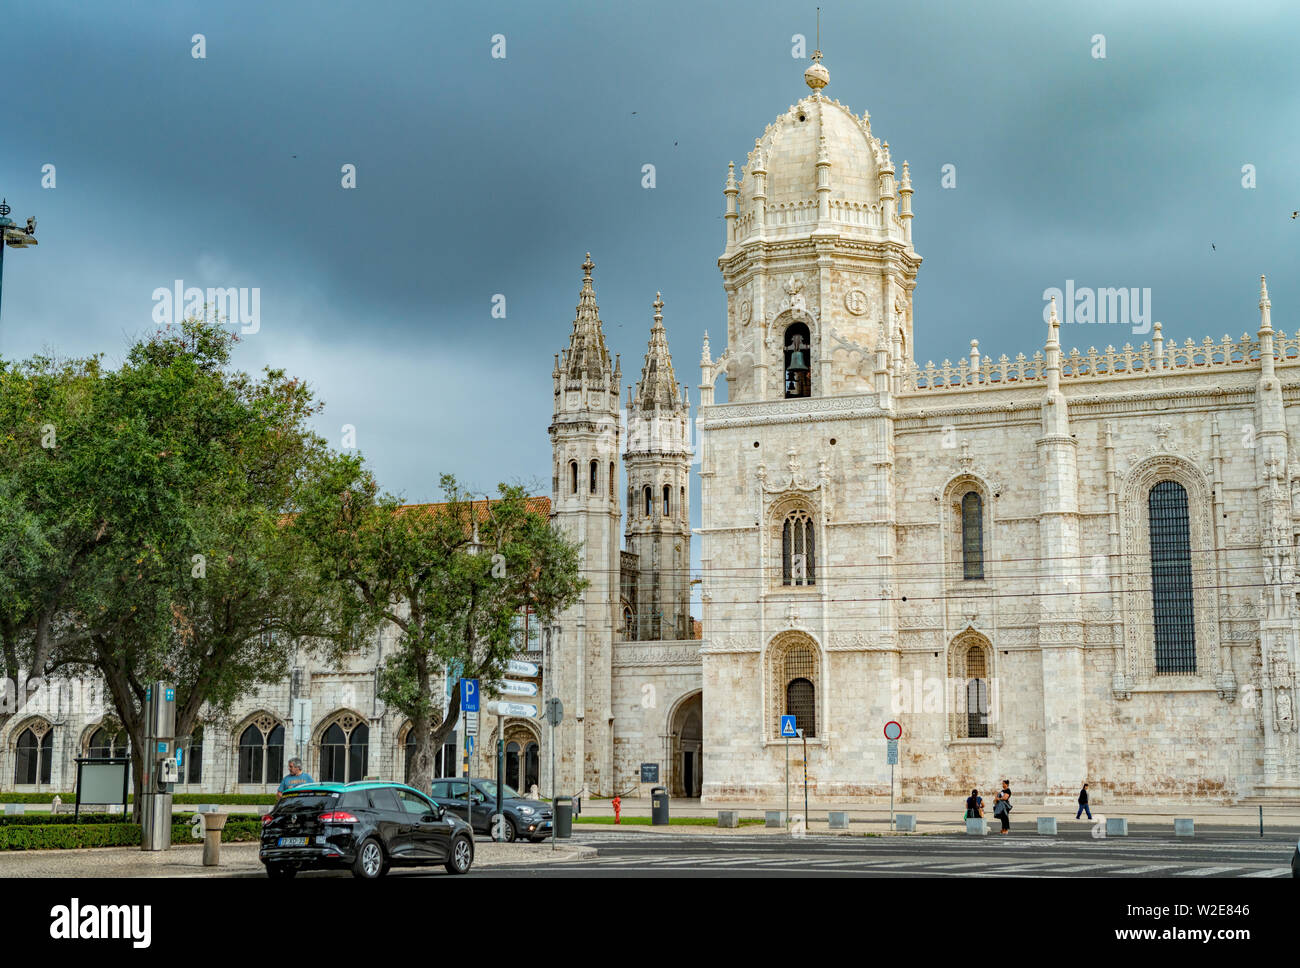 Mosteiro dos Jeronimos in Lisbon, Portugal. The monastery is one of the most prominent examples of the Portuguese Late Gothic Manueline style of archi Stock Photo